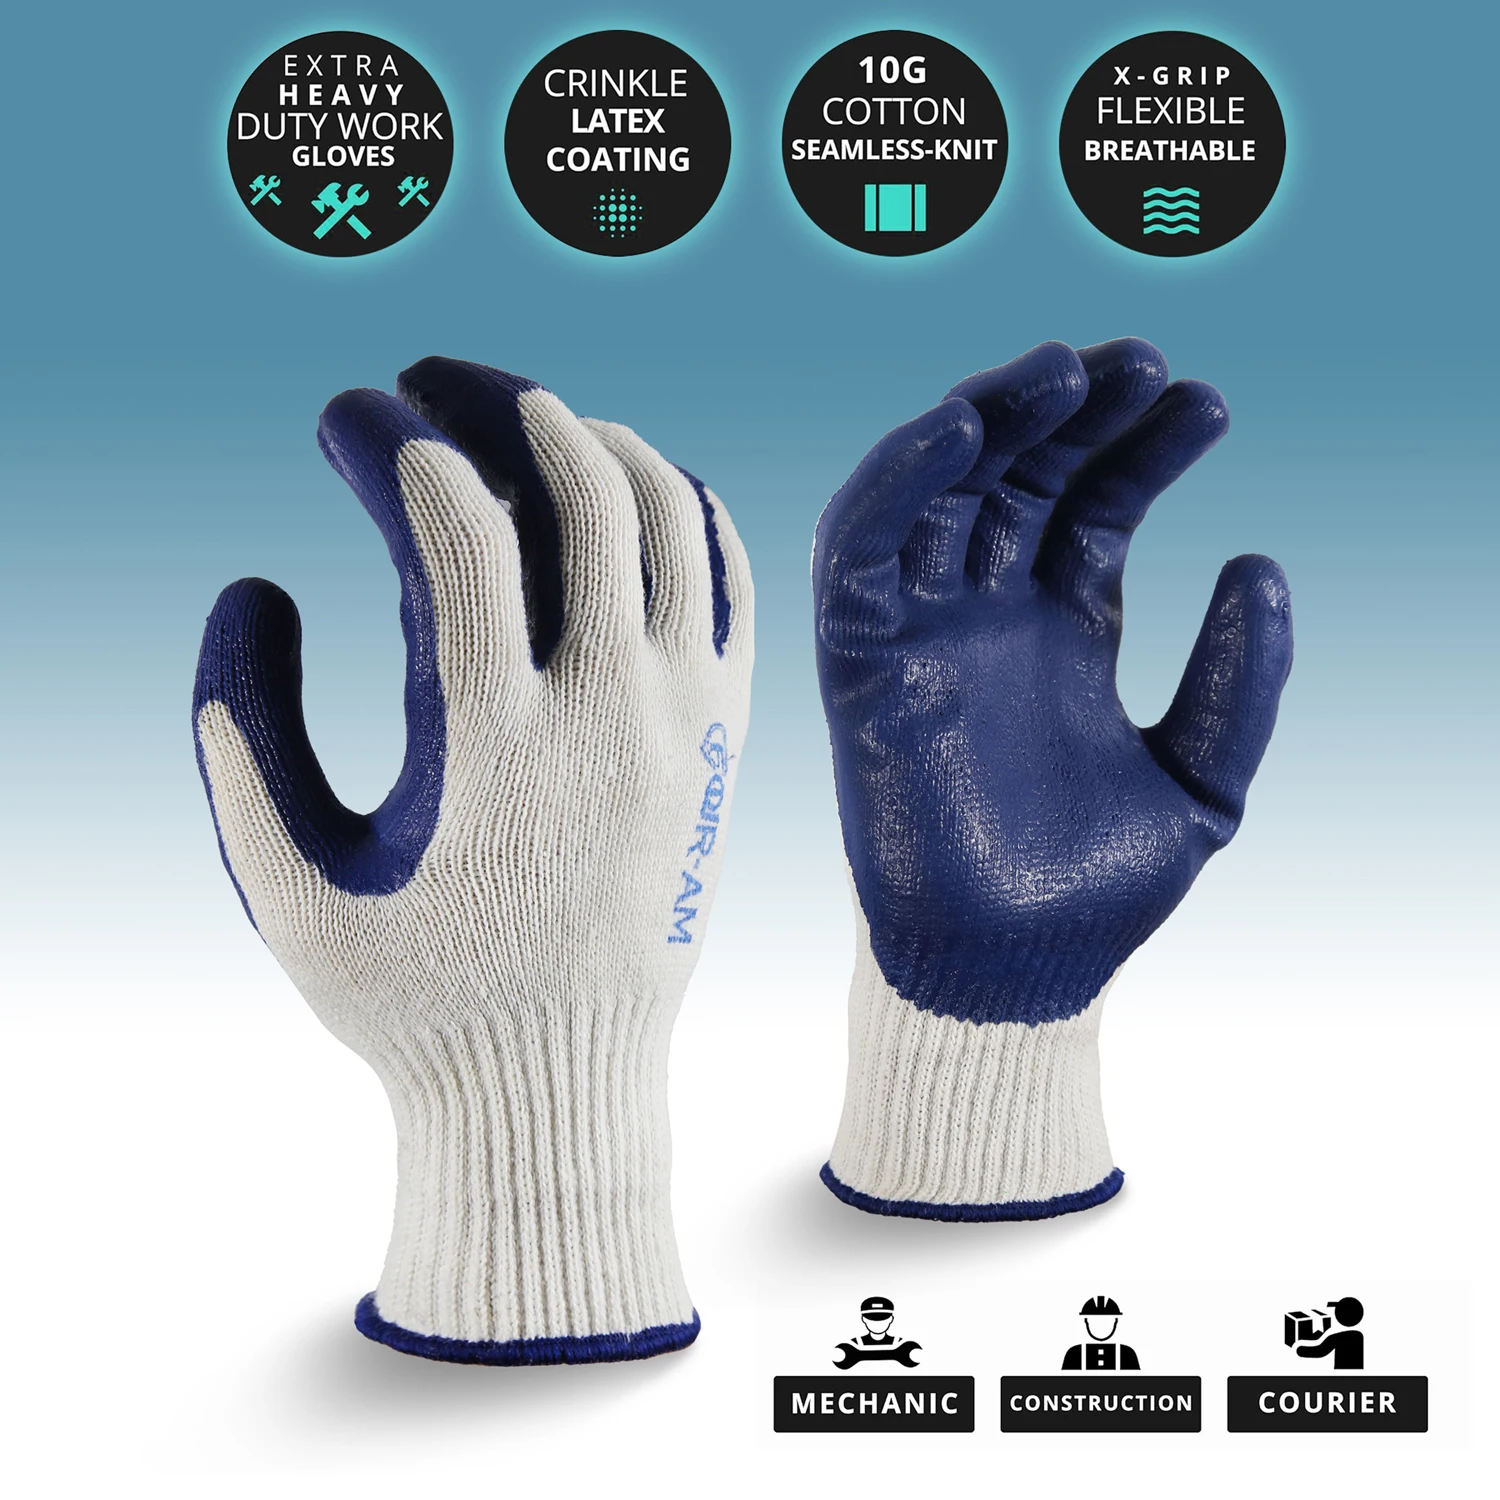 1/6Pairs 10G Blue Latex Cotton Multi-purpose Work Glove.Nitrile Dipped & Rubber palm coated for a firm grip.Heavy Duty Premium